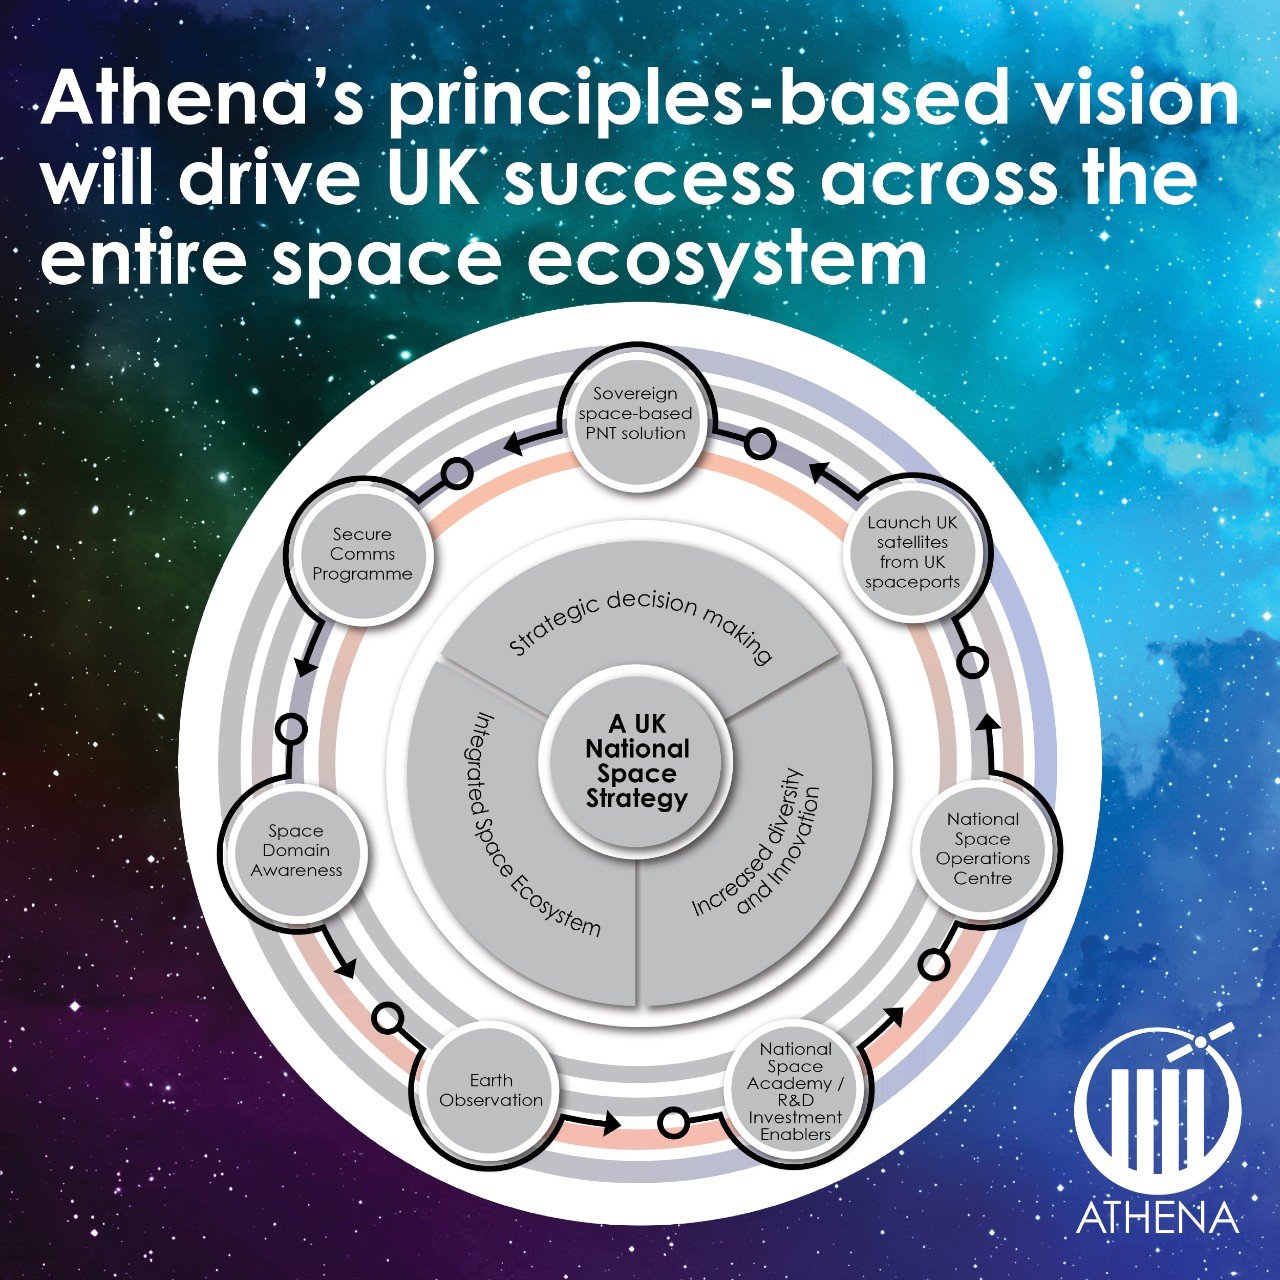 Infographic: Athena Consortium principles-based vision will drive UK success across the entire space ecosystem